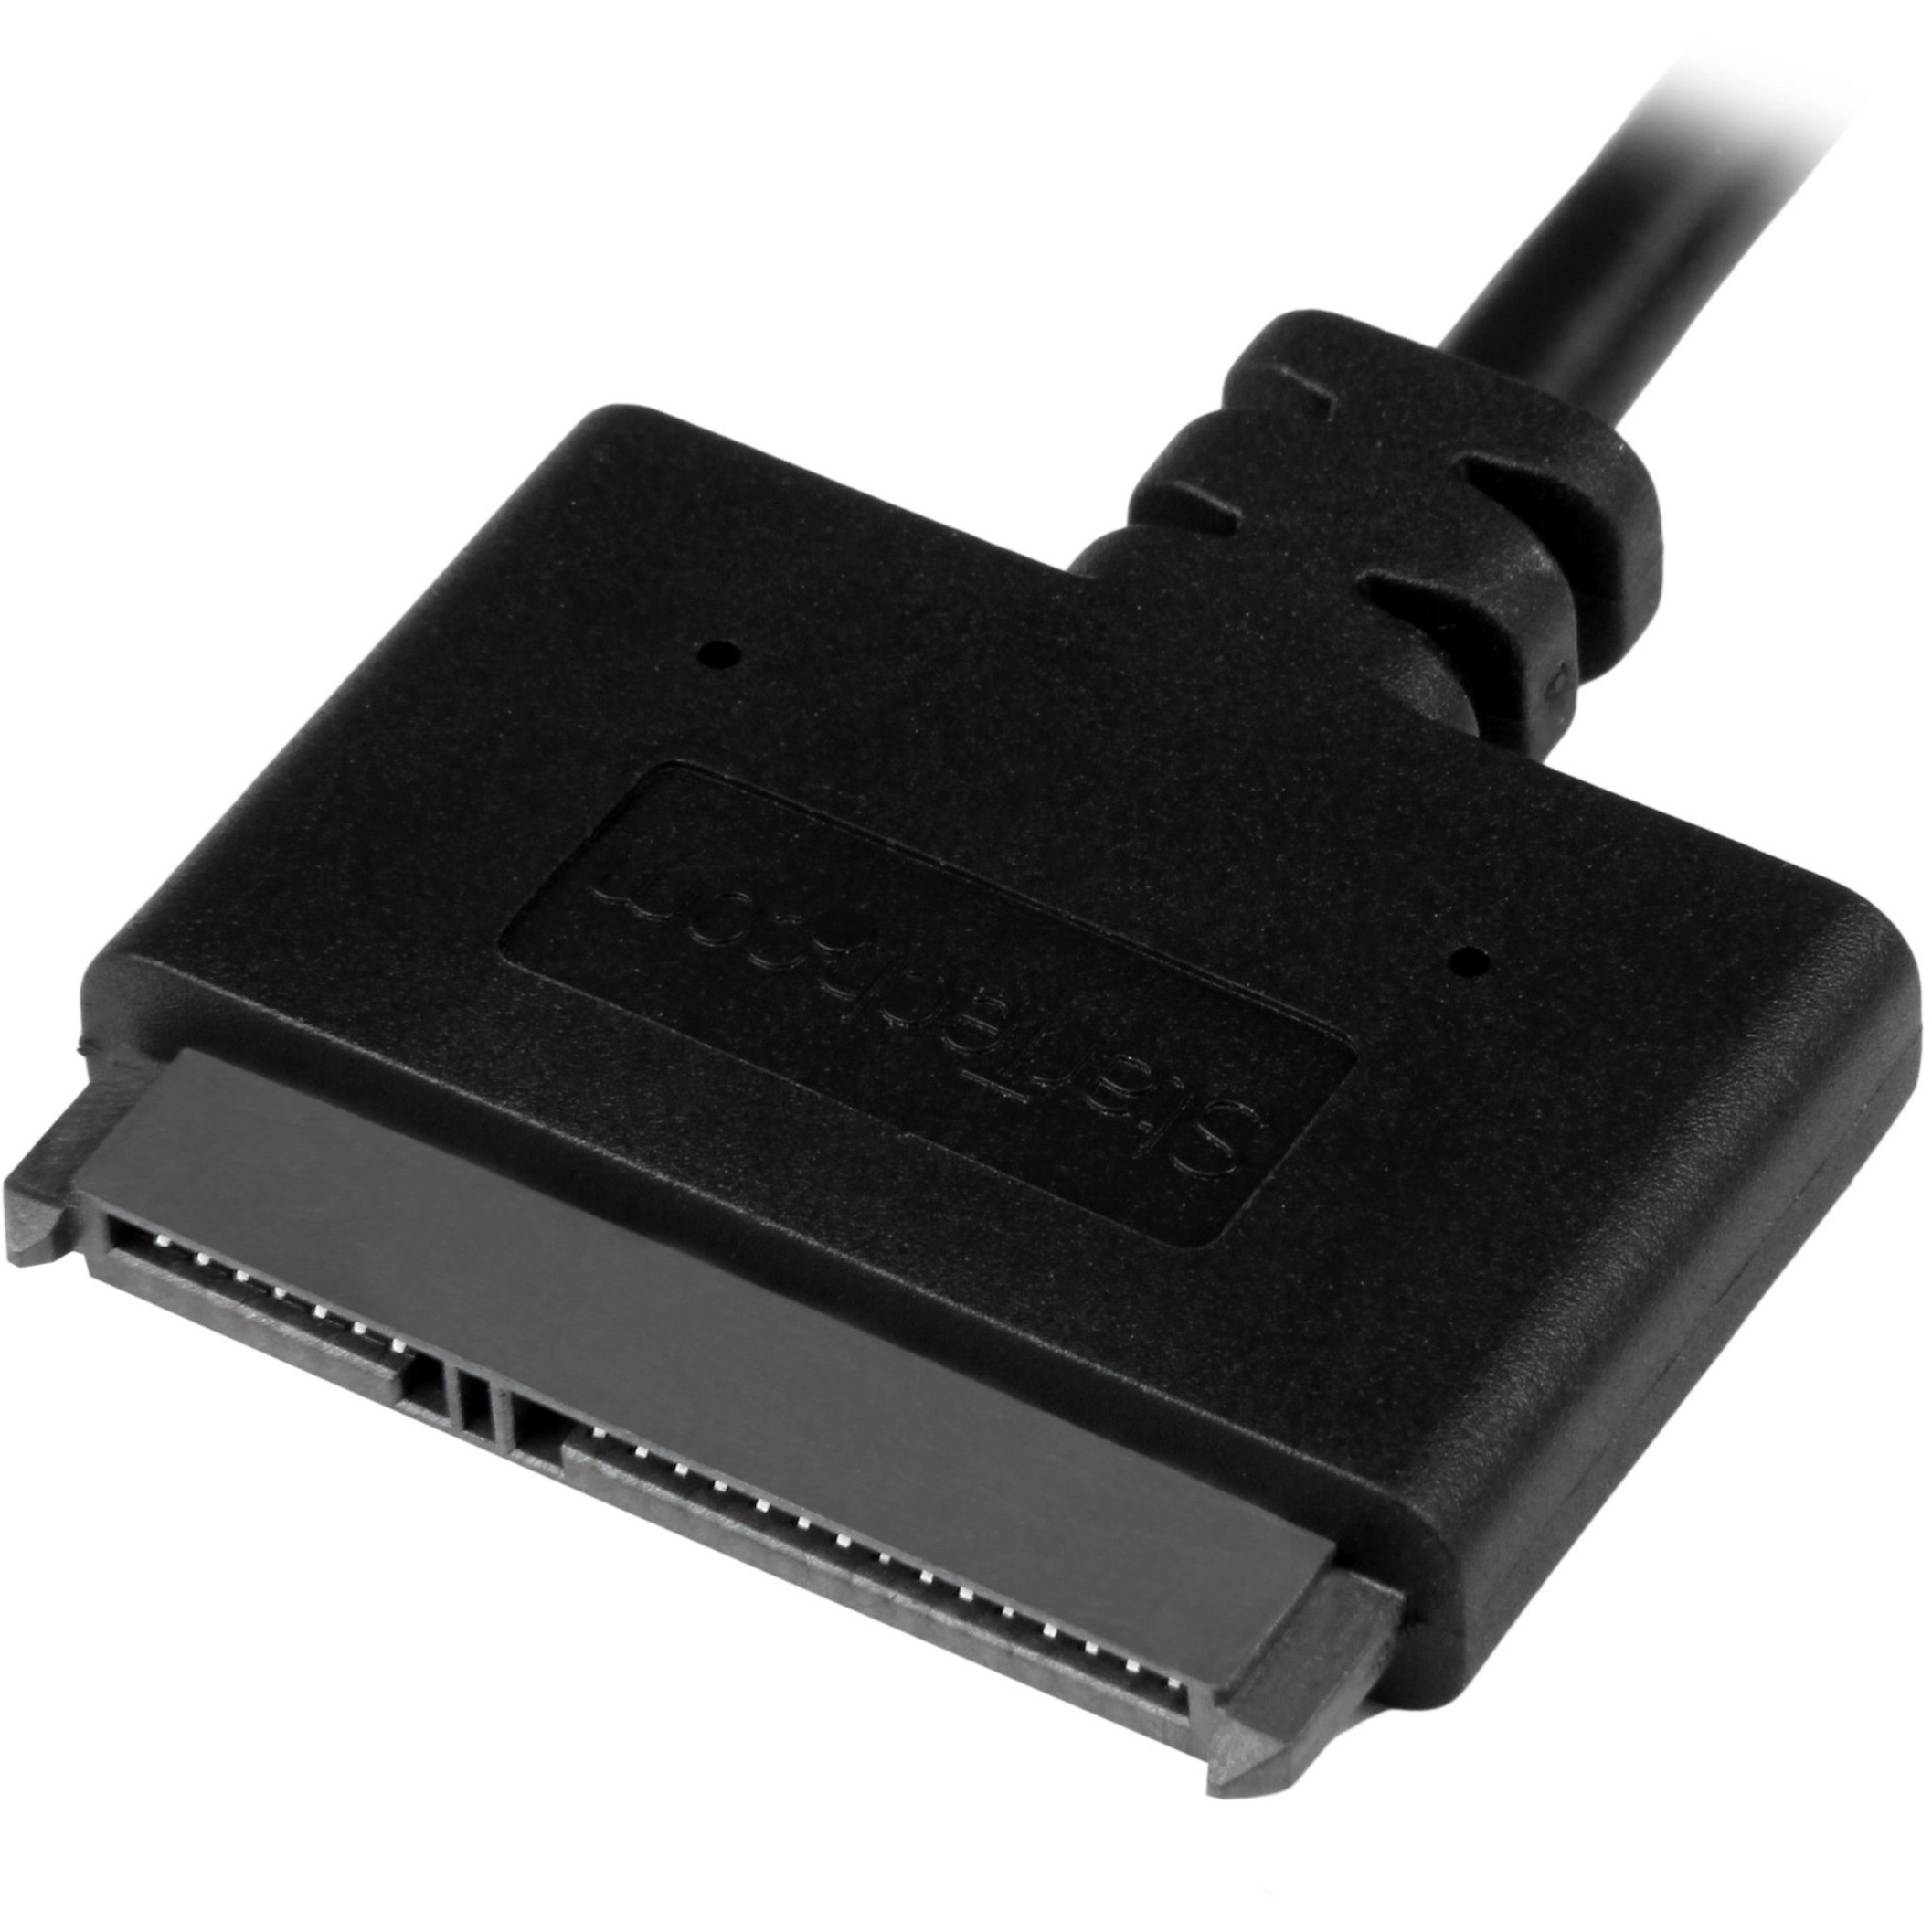 Startech .com USB 3.1 (10Gbps) Adapter Cable for 2.5 SATA SSD/HDD  DrivesConnect a 2.5 SATA SSD/HDD to your computer using this USB 3.1  USB312SAT3CB - Corporate Armor